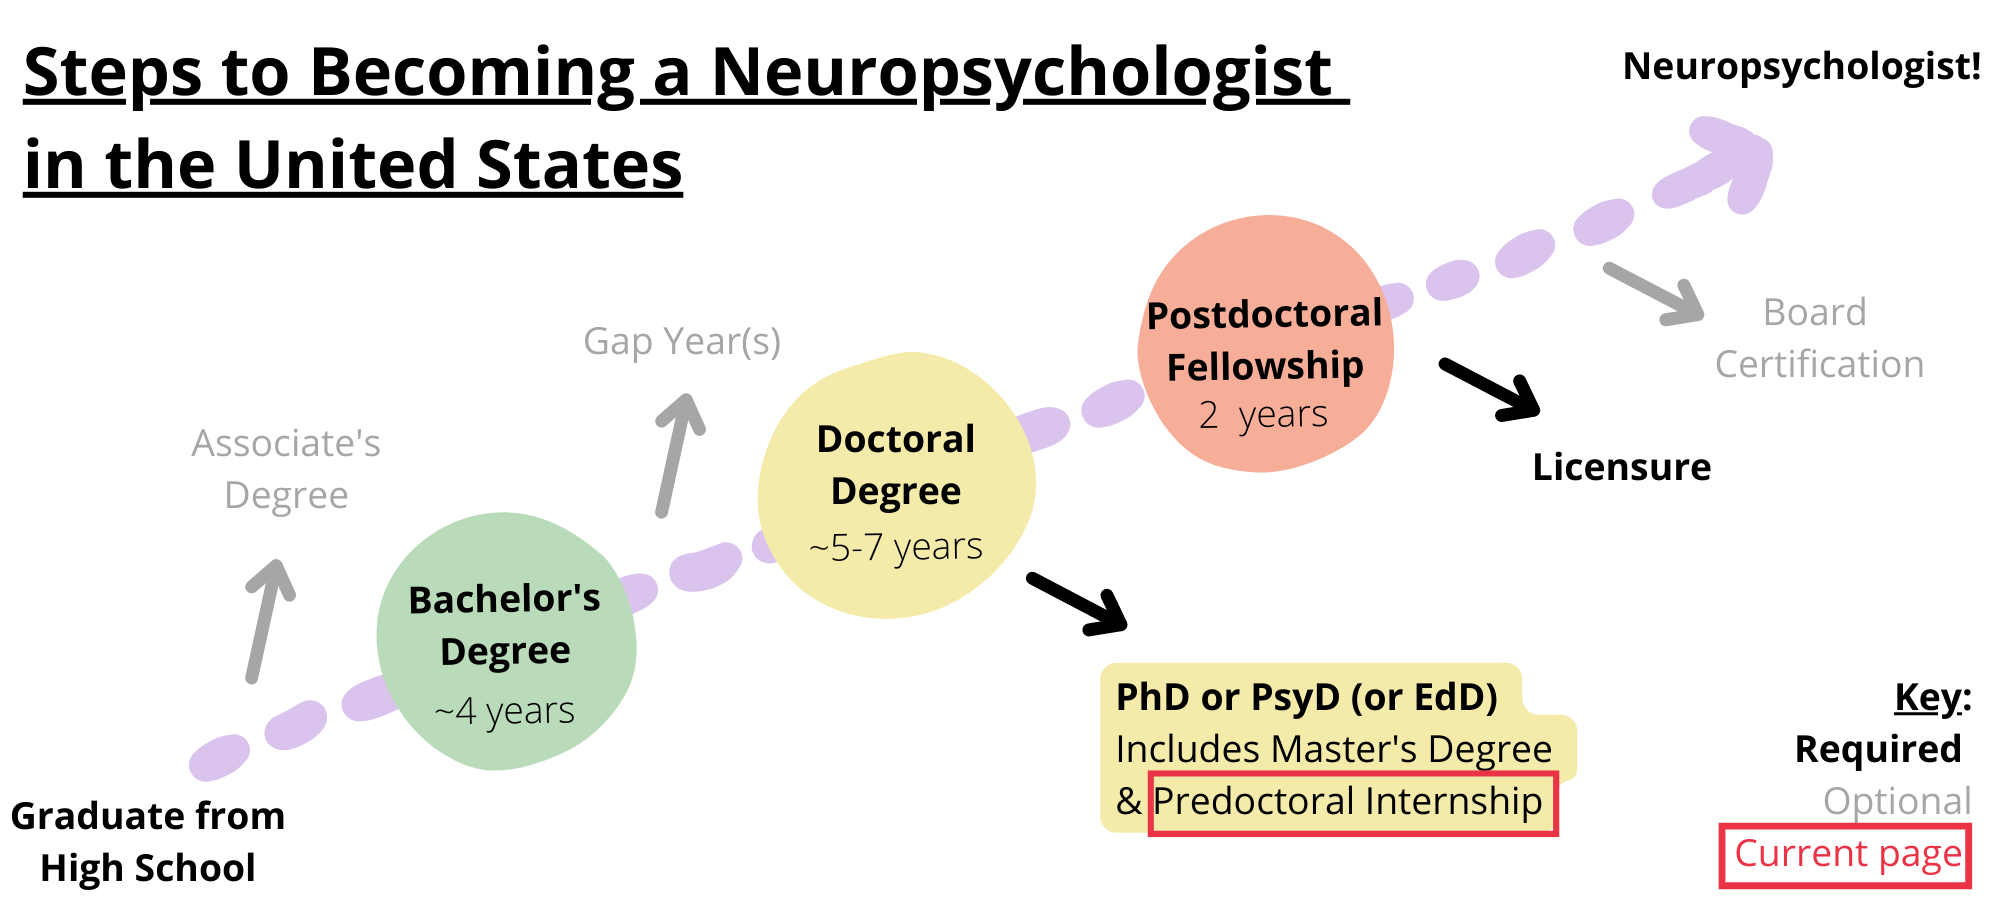 Steps to becoming a neuropsychologist in the United States. Required steps include graduating from high school, obtaining a bachelor’s degree, obtaining a doctoral degree like a PhD, PsyD, or EdD, completing a postdoctoral fellowship, and licensure. Optional steps include obtaining an associate’s degree, taking a gap year, and board certification. You are on the step predoctoral internship, which is part of obtaining a doctoral degree.